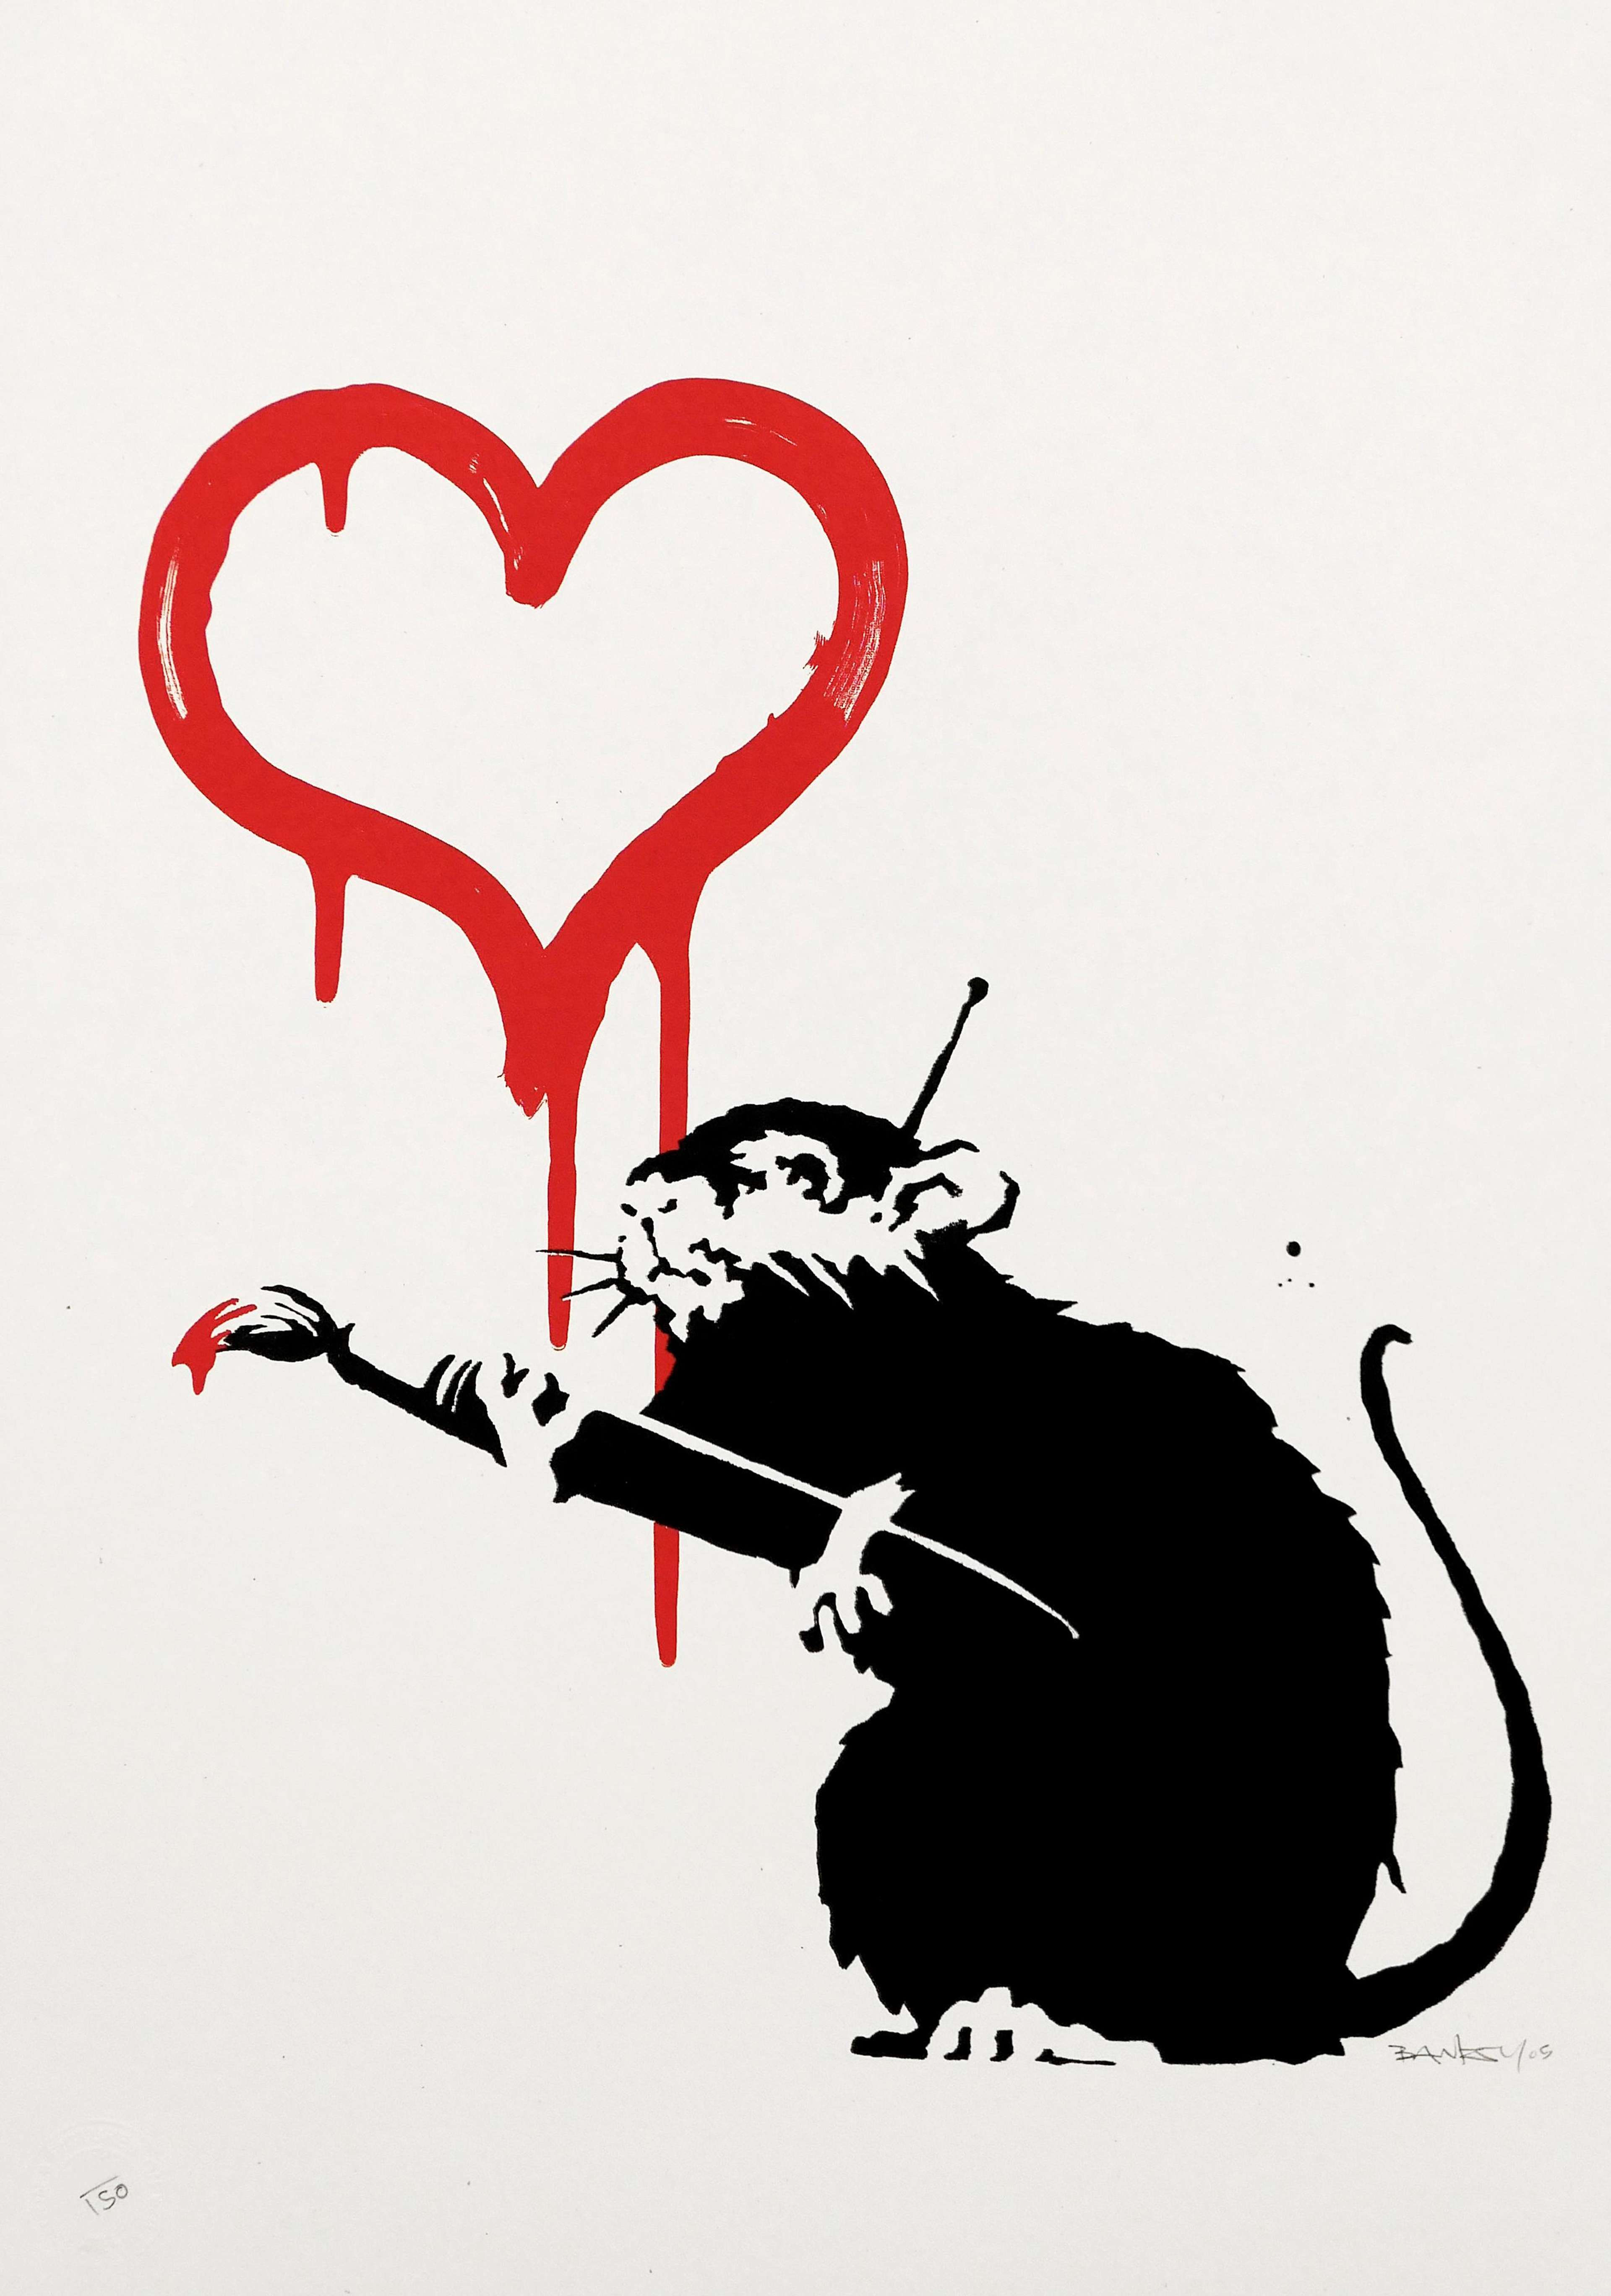 The Average Price Of A Banksy Print Vs Gold, Shares And Assets